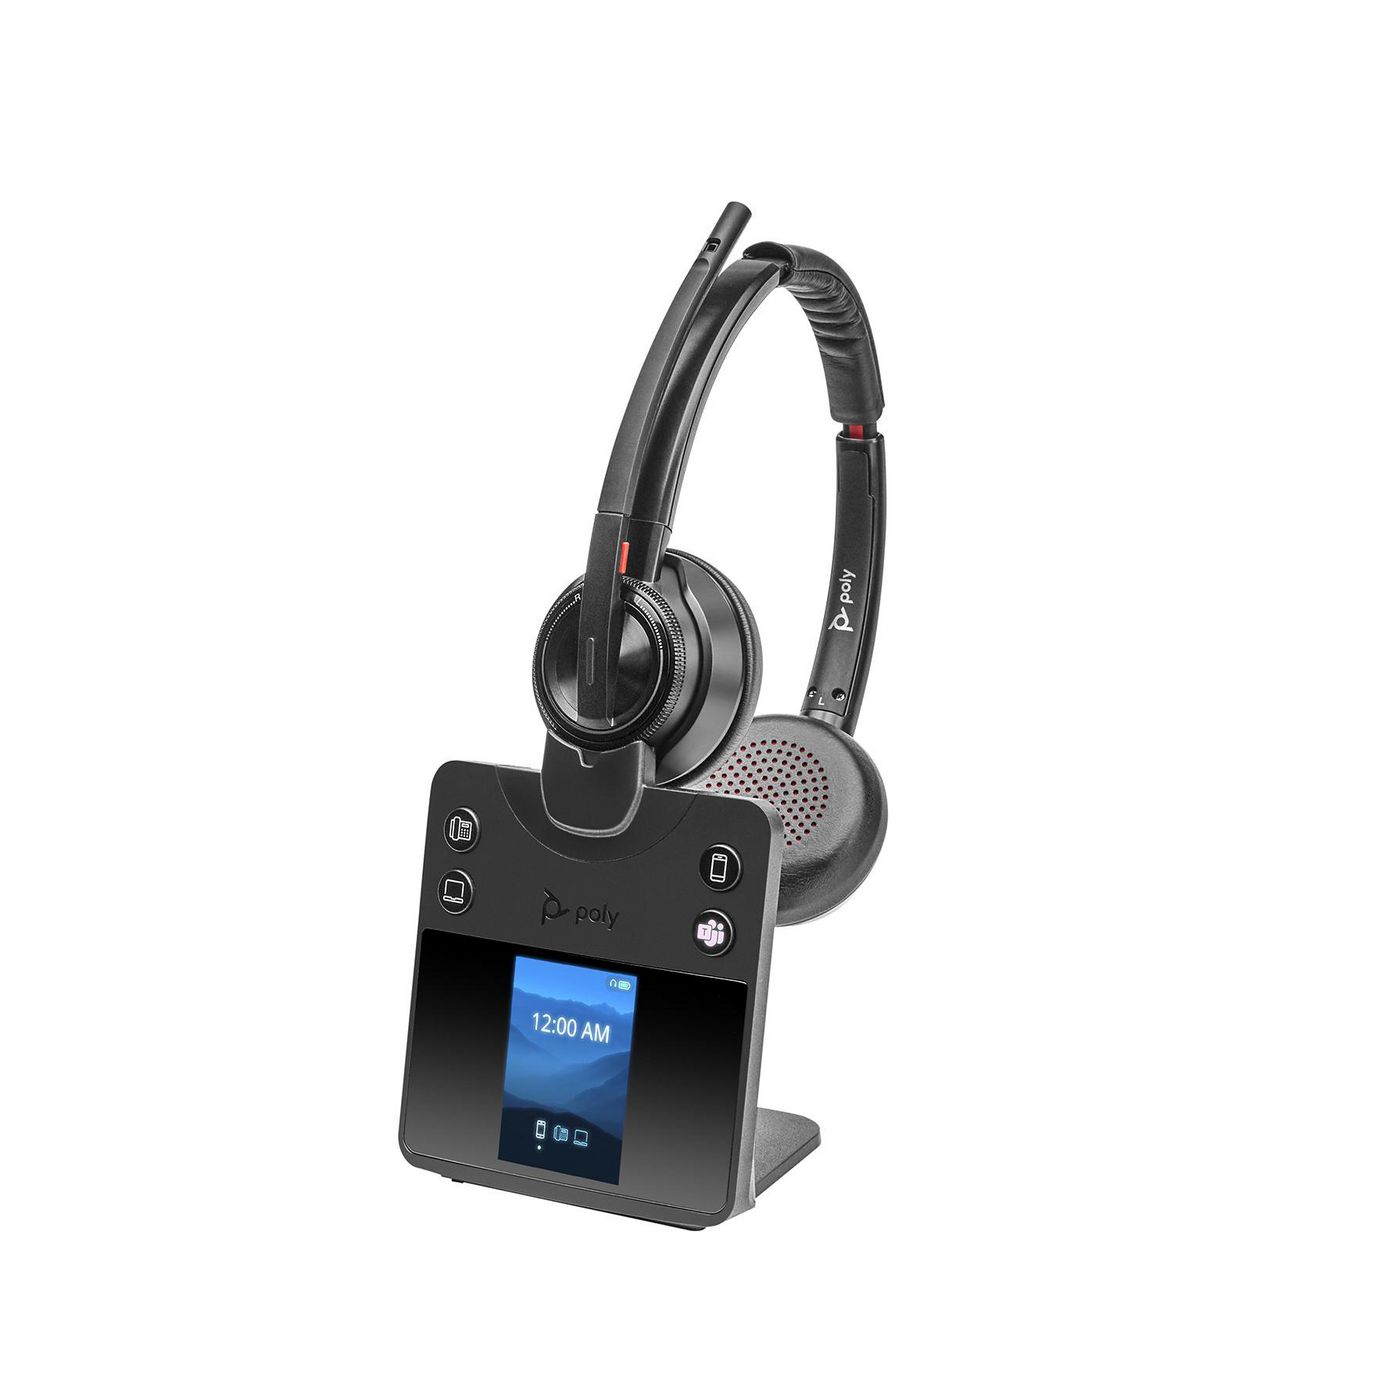 HP Poly Savi 8420 Office Stereo Microsoft Teams Certified DECT 1880-1900 MHz Headset-EURO